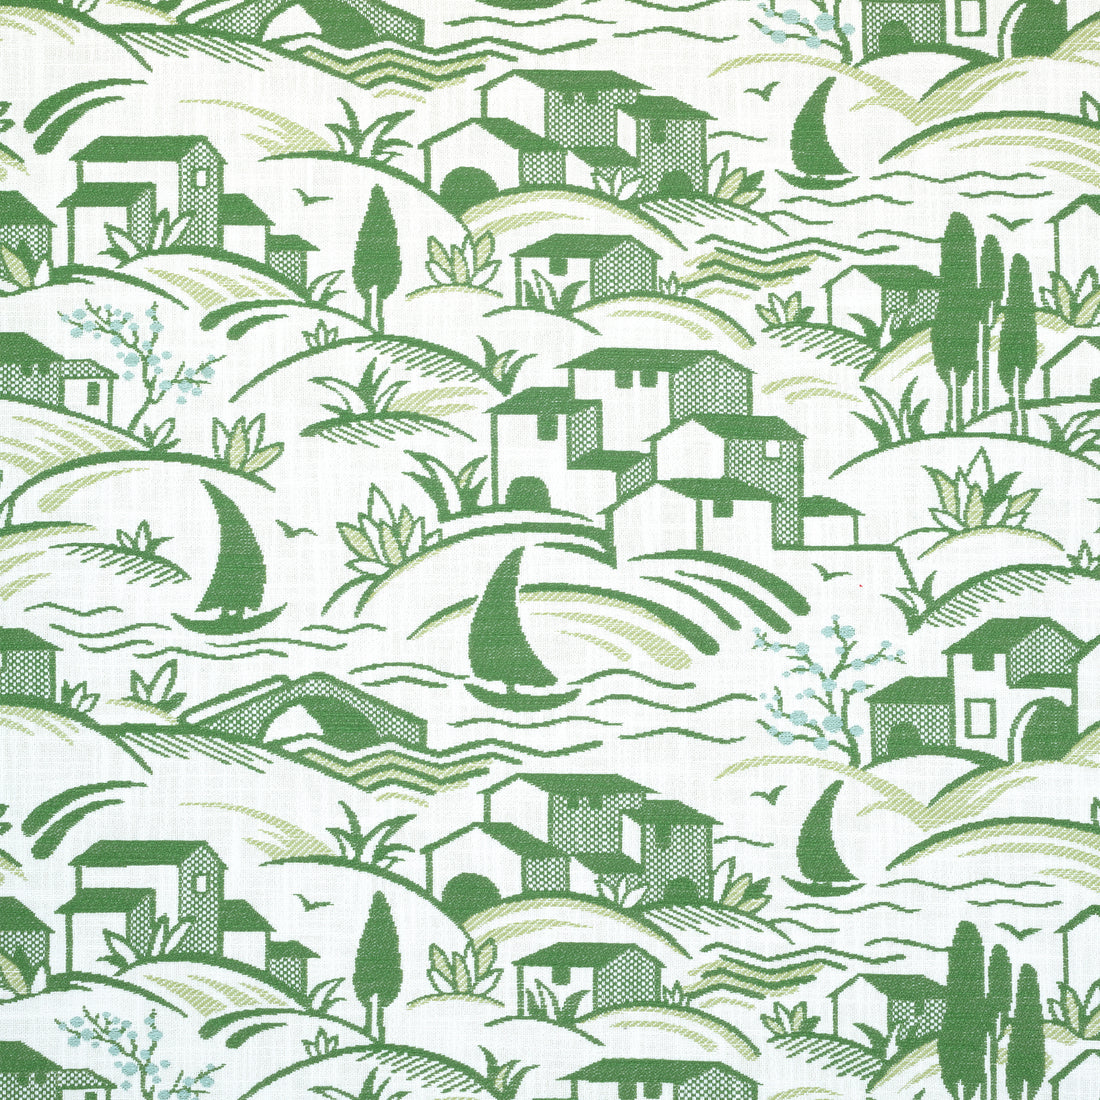 Landmark fabric in seafoam and kelly green color - pattern number W73521 - by Thibaut in the Landmark collection